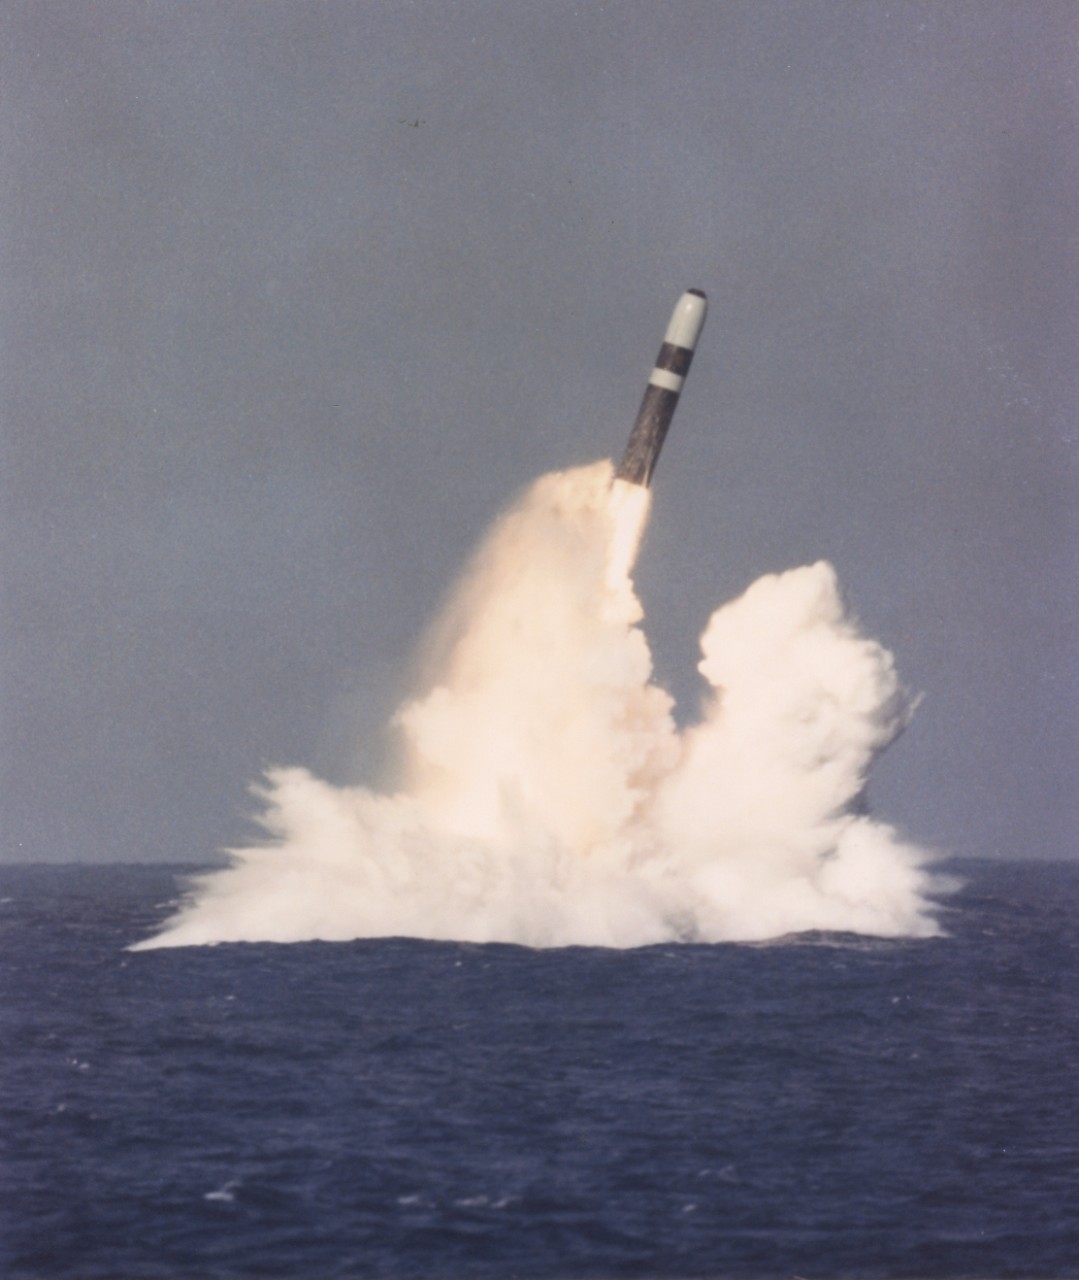 <p>L55-19-06-015 Trident Missile Test launch from Submarine</p>
